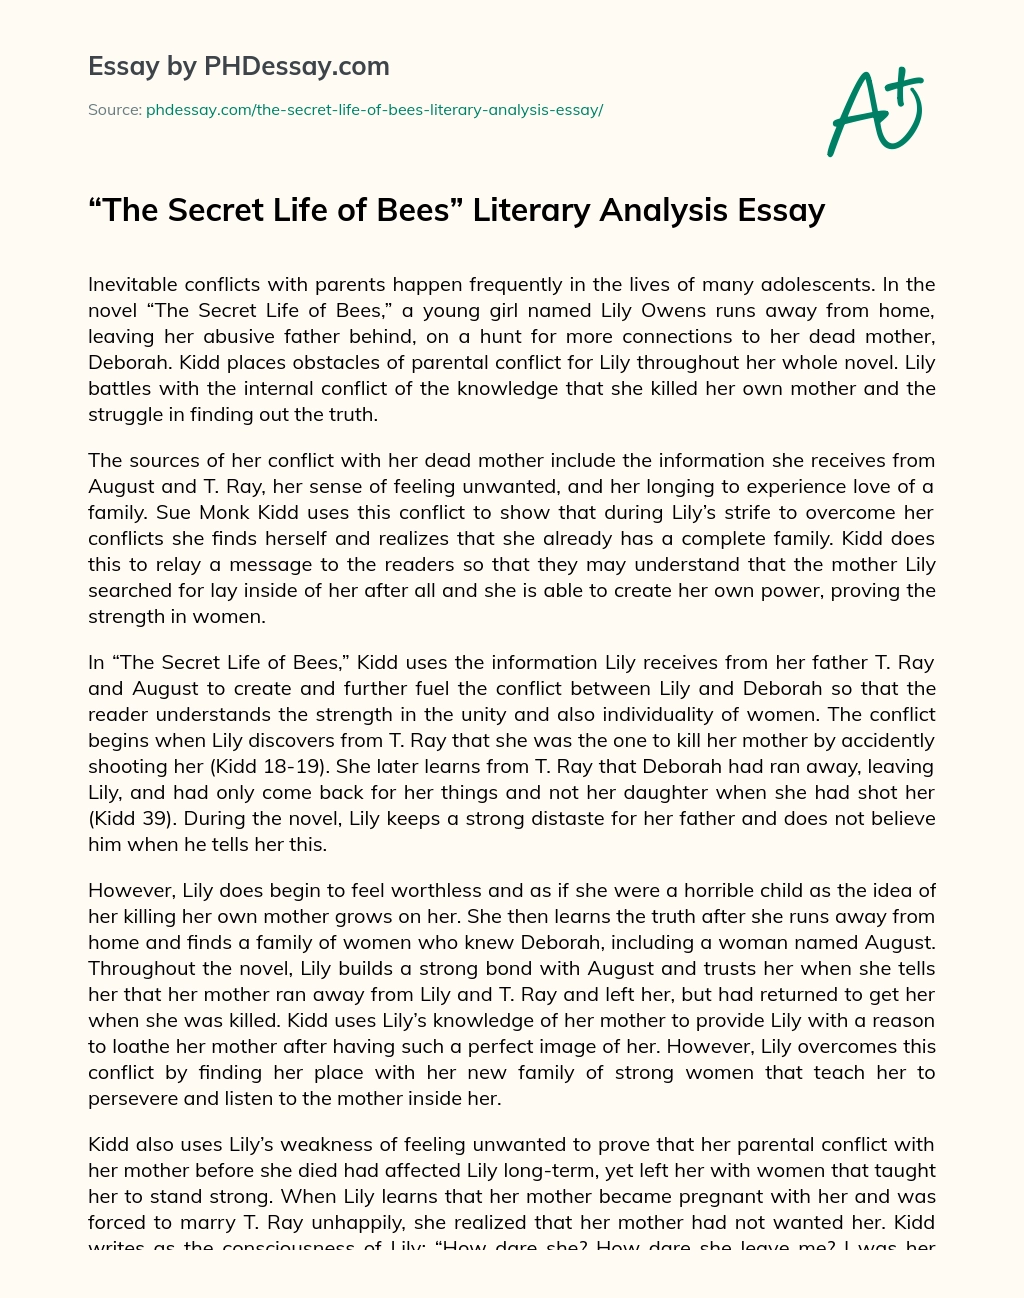 literary devices in the secret life of bees